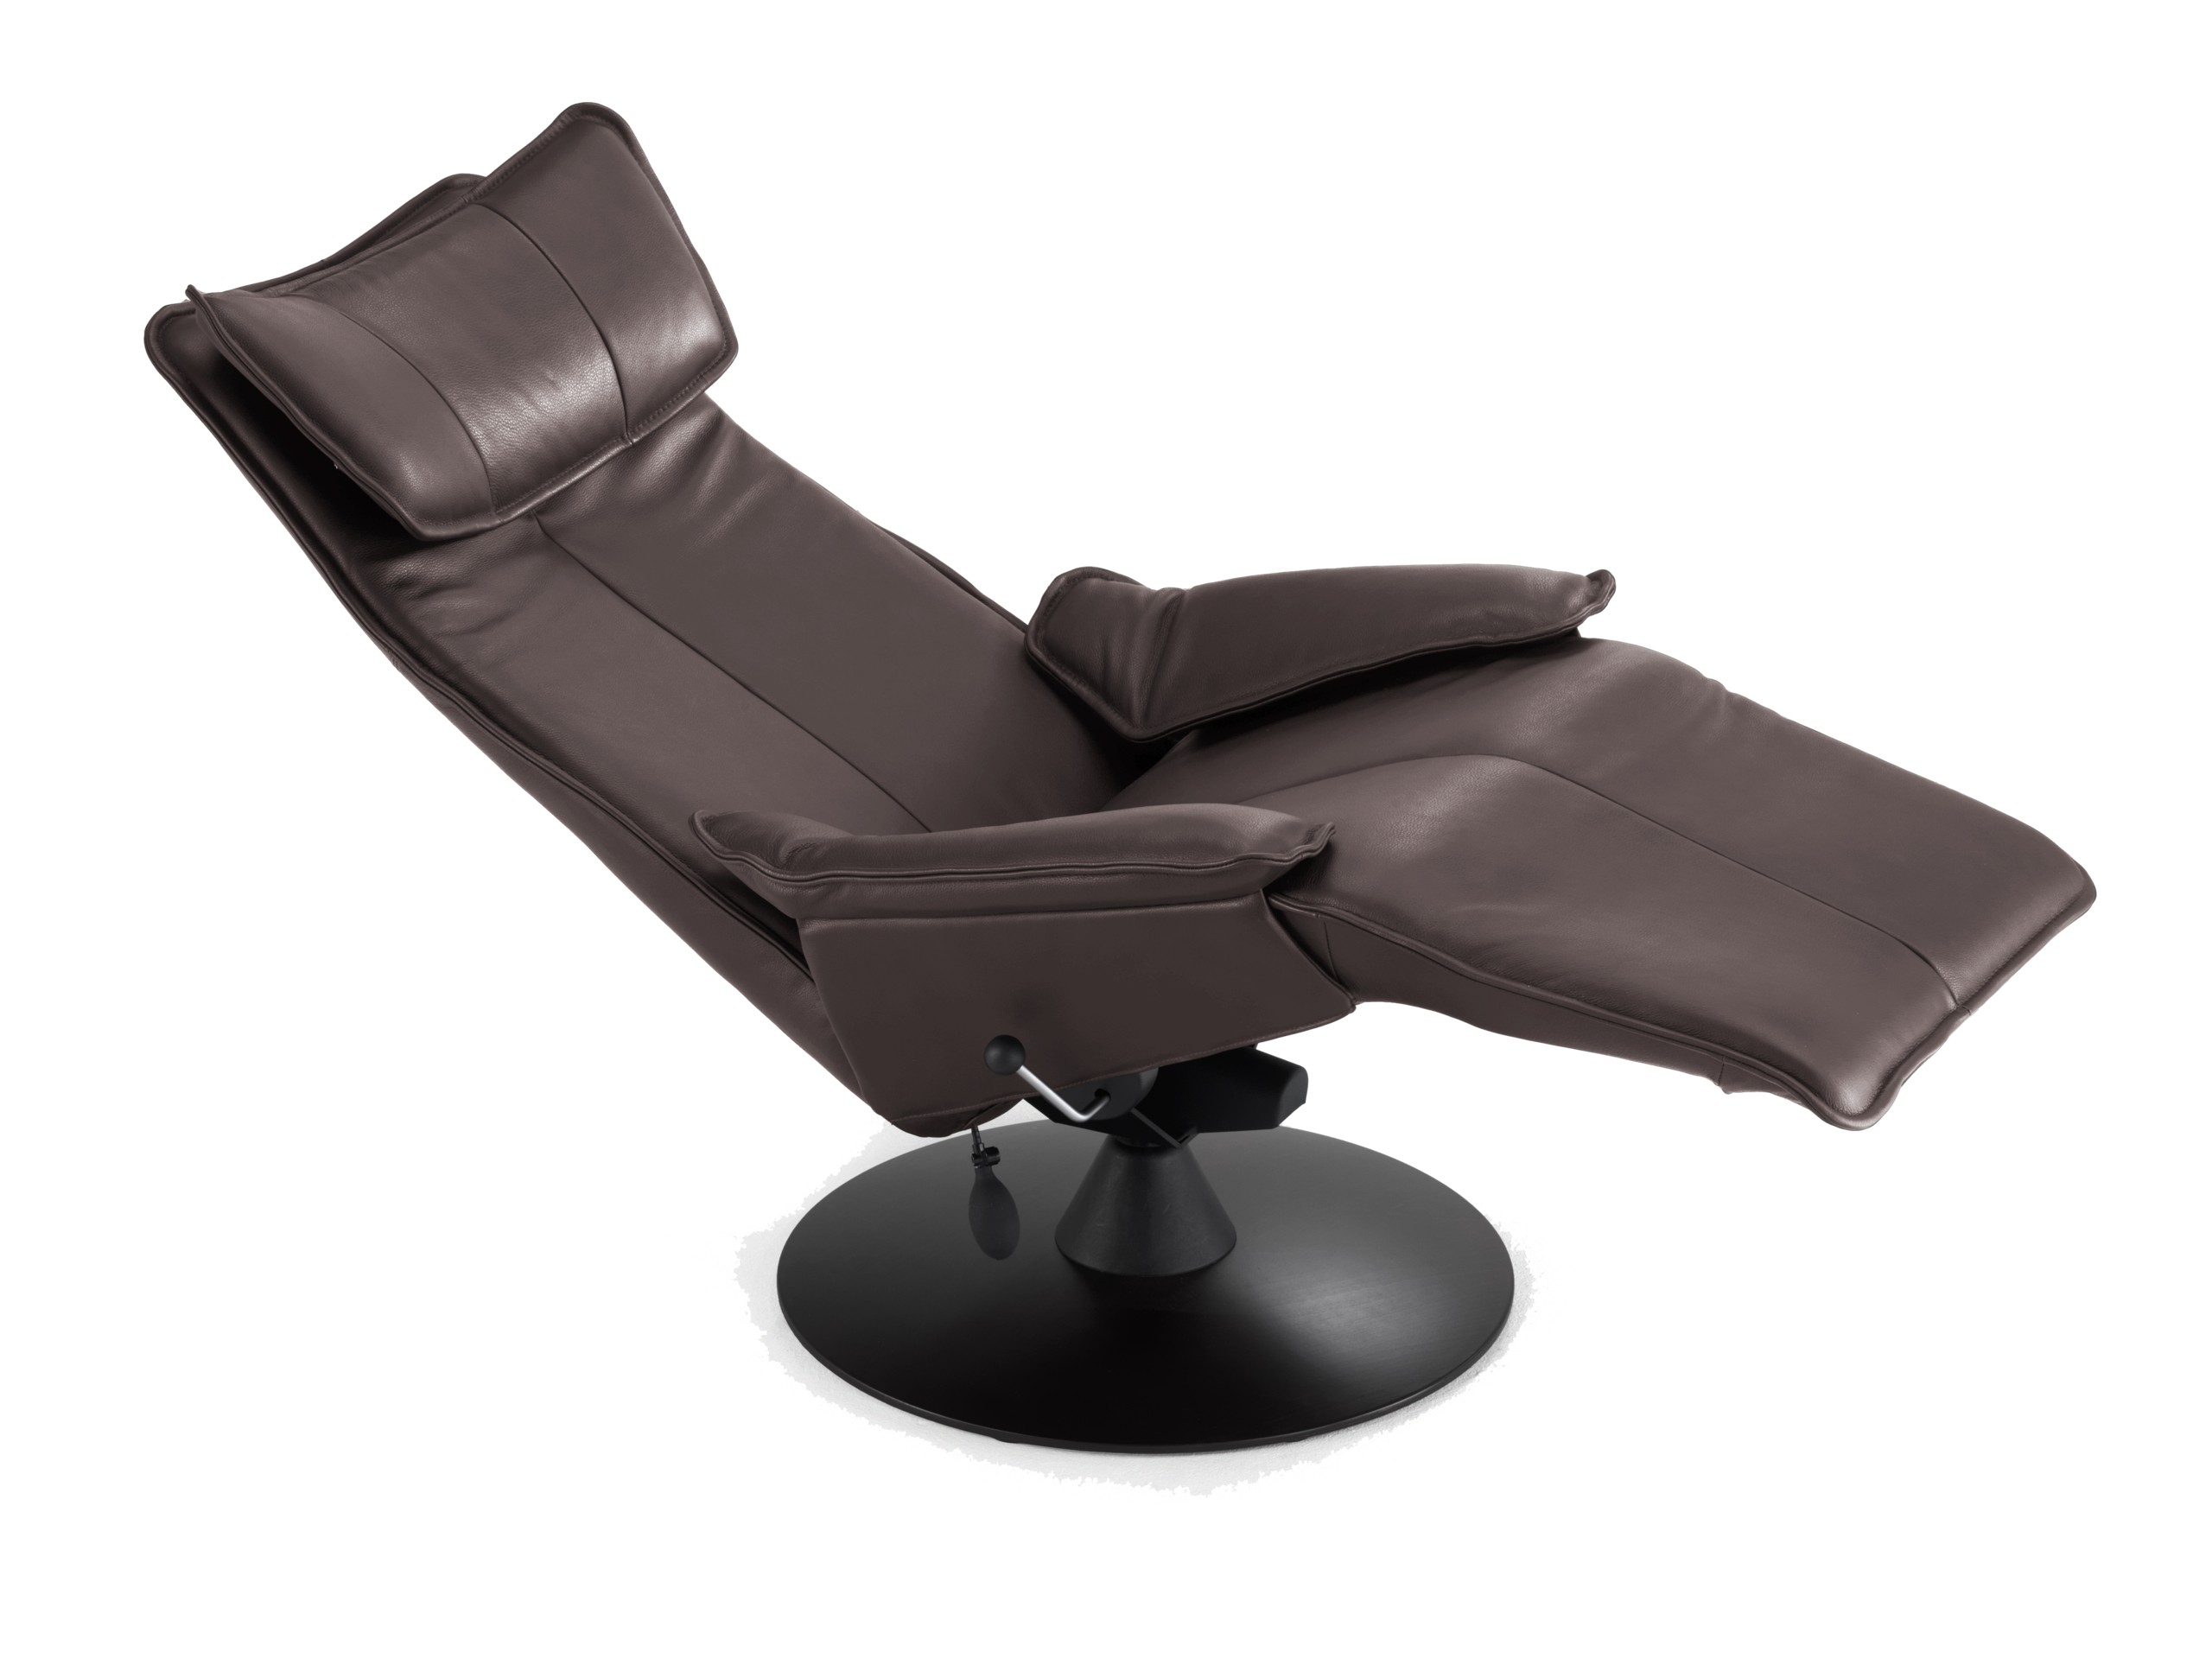 Fjords Contura 2010 Zero Gravity Recliner Chair in Premium Astro Line Black Leather Manual Black Base by Hjellegjerde - Standard Ground Curbside Delivery